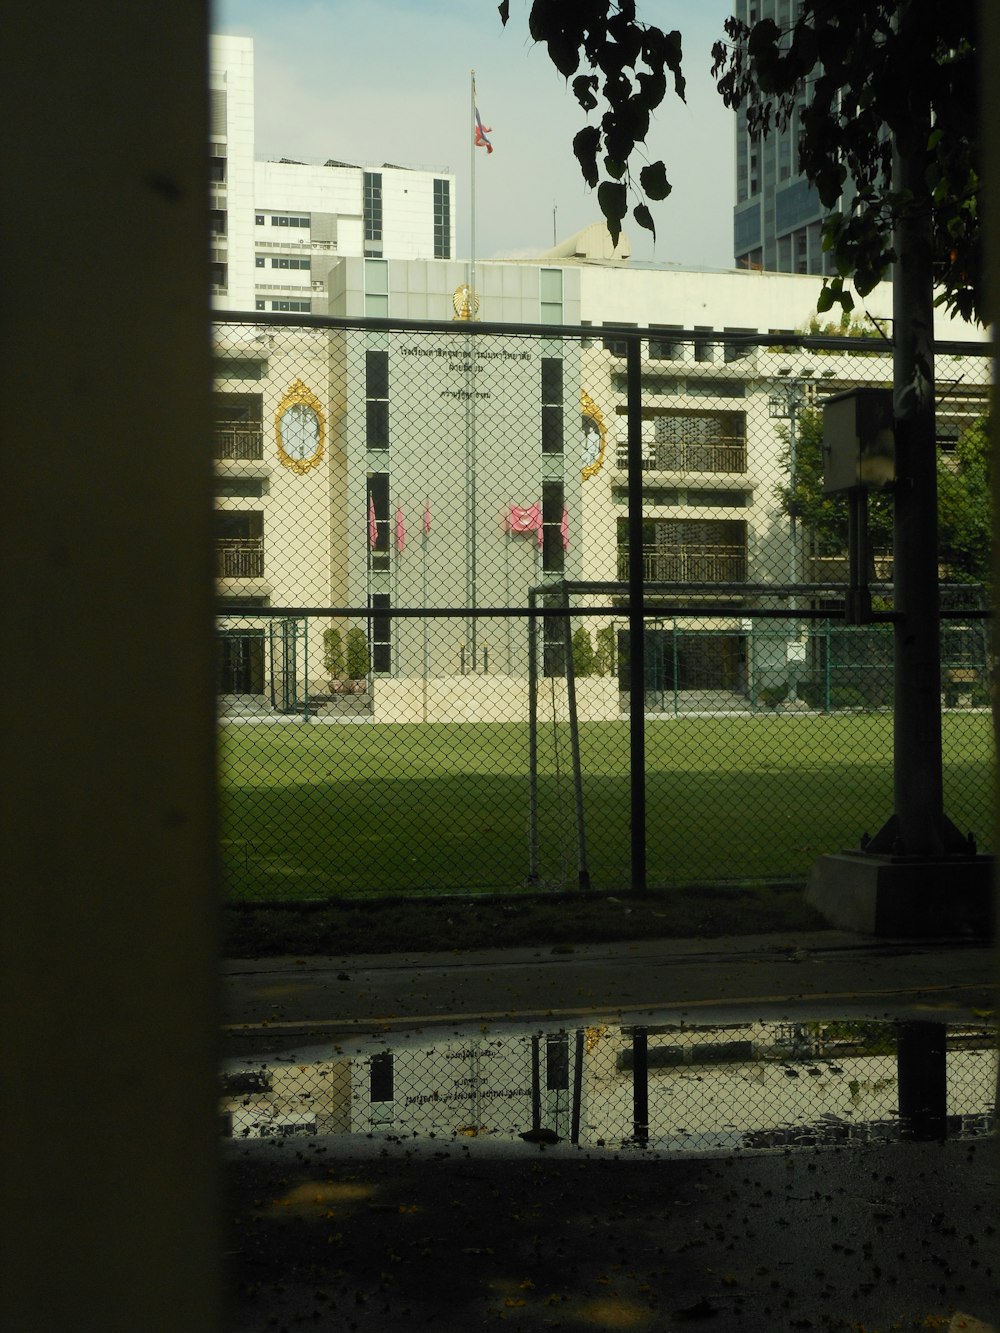 a grassy field behind a fence with a building in the background